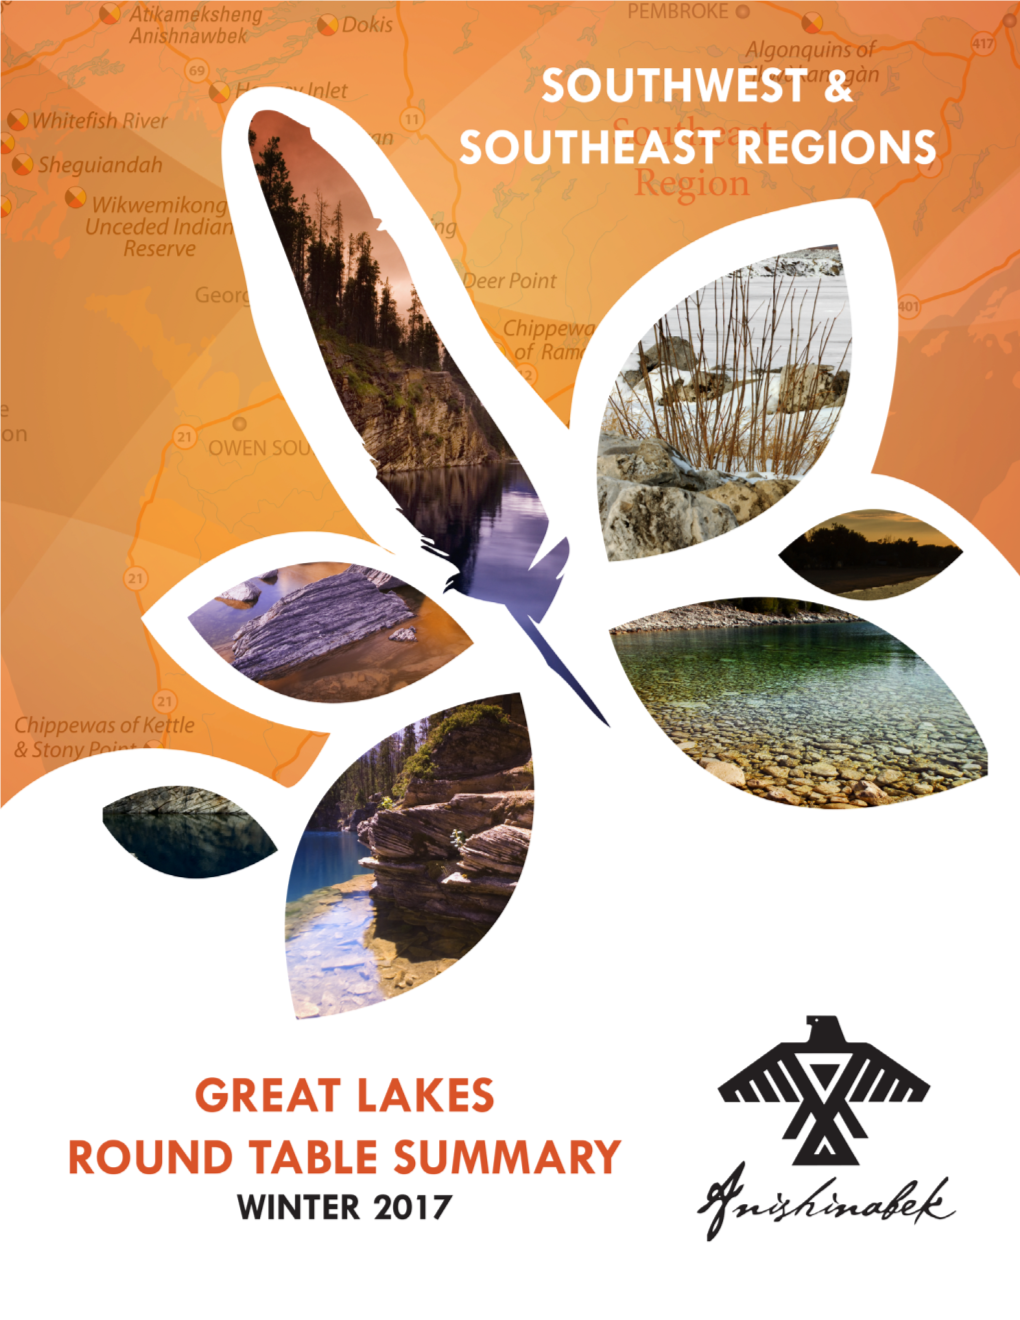 Southwest & Southeast Regions Great Lakes Round Tables Summary